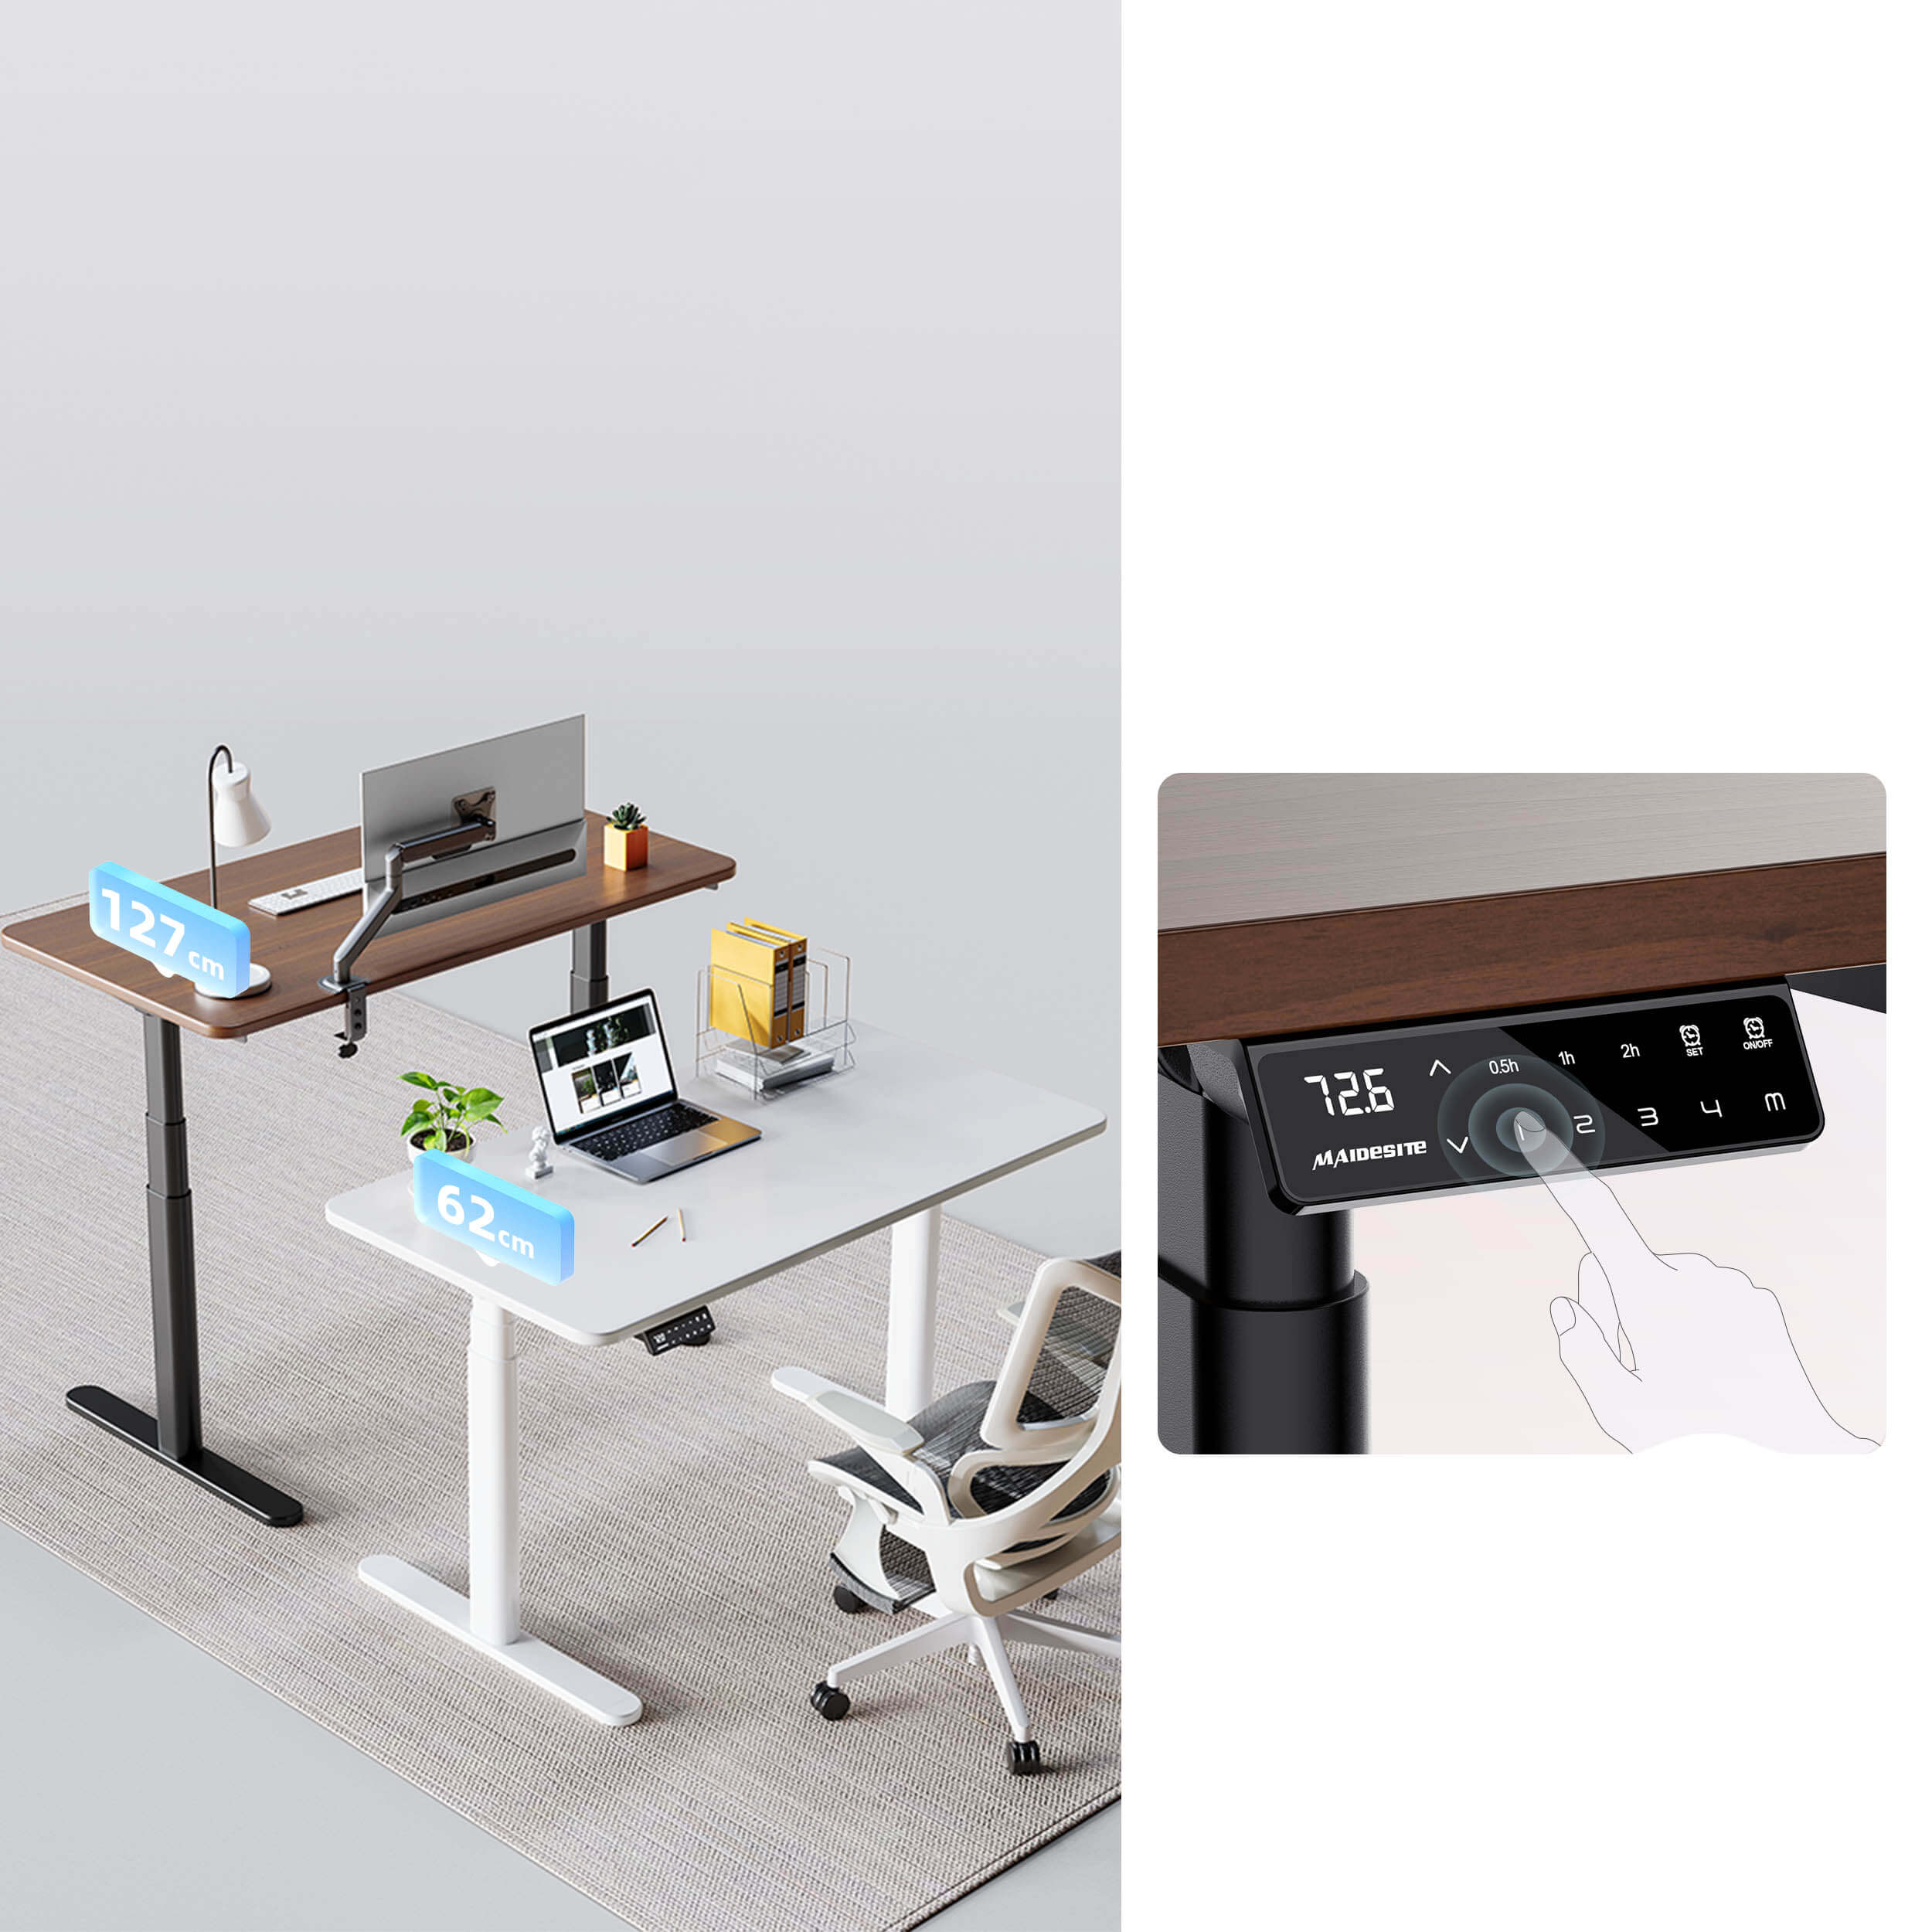 Maidesite T2 Pro Plus standing desk frame is best for people study and work from home use